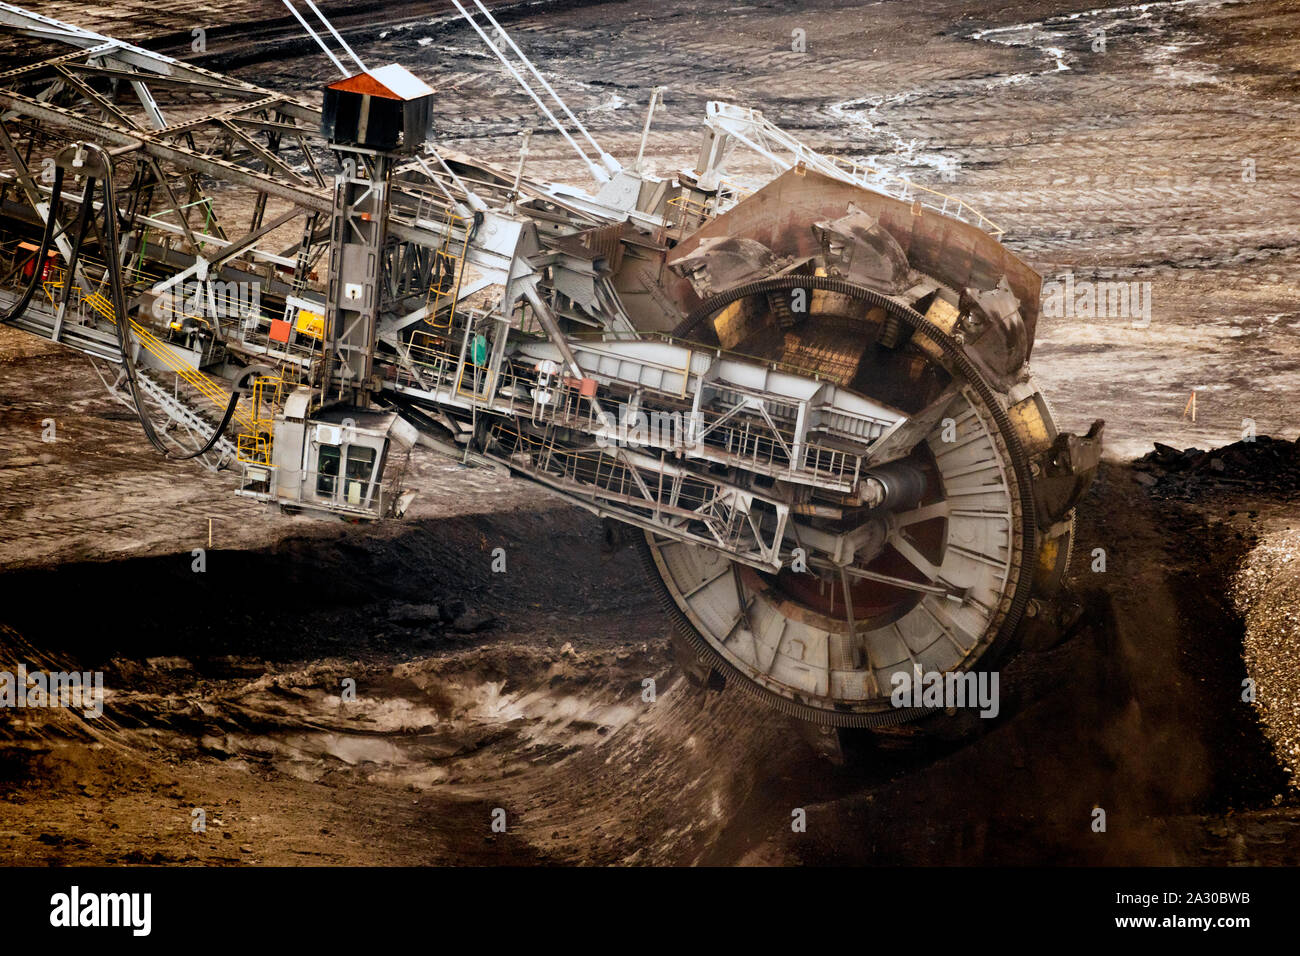 Large bucket wheel excavator mining machine at work in a brown coal open pit mine. Stock Photo